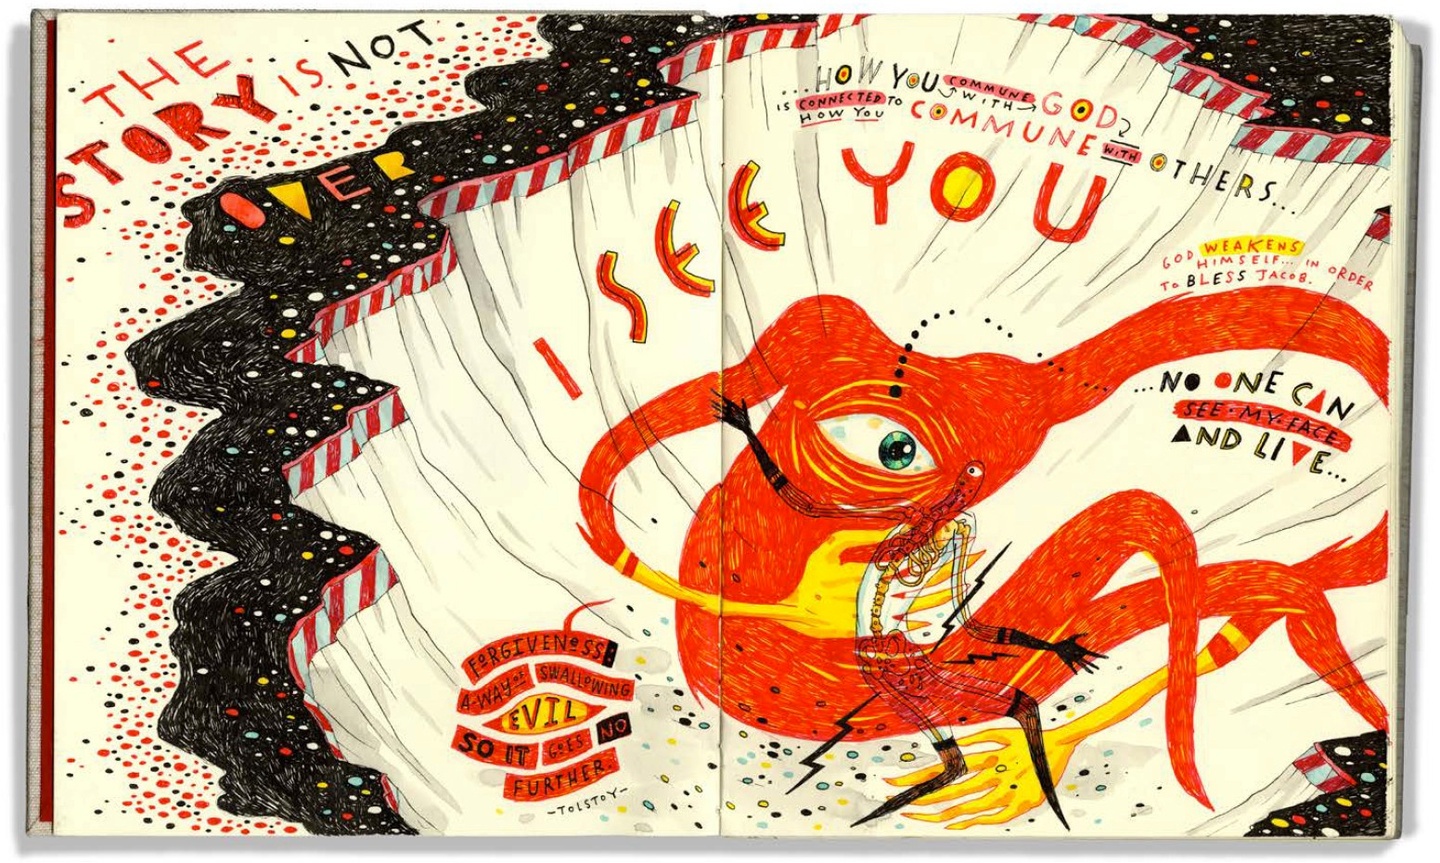 Illustration by John Hendrix. At the center, an amorphous, red creature with one giant eye and yellow hands, sitting in black-rimmed crater. Hand-drawn text in the upper left corner reads The story is not over. Hand-drawn text above the creature reads I See You. Other quotes from the Bible and other sources appear around the creature.